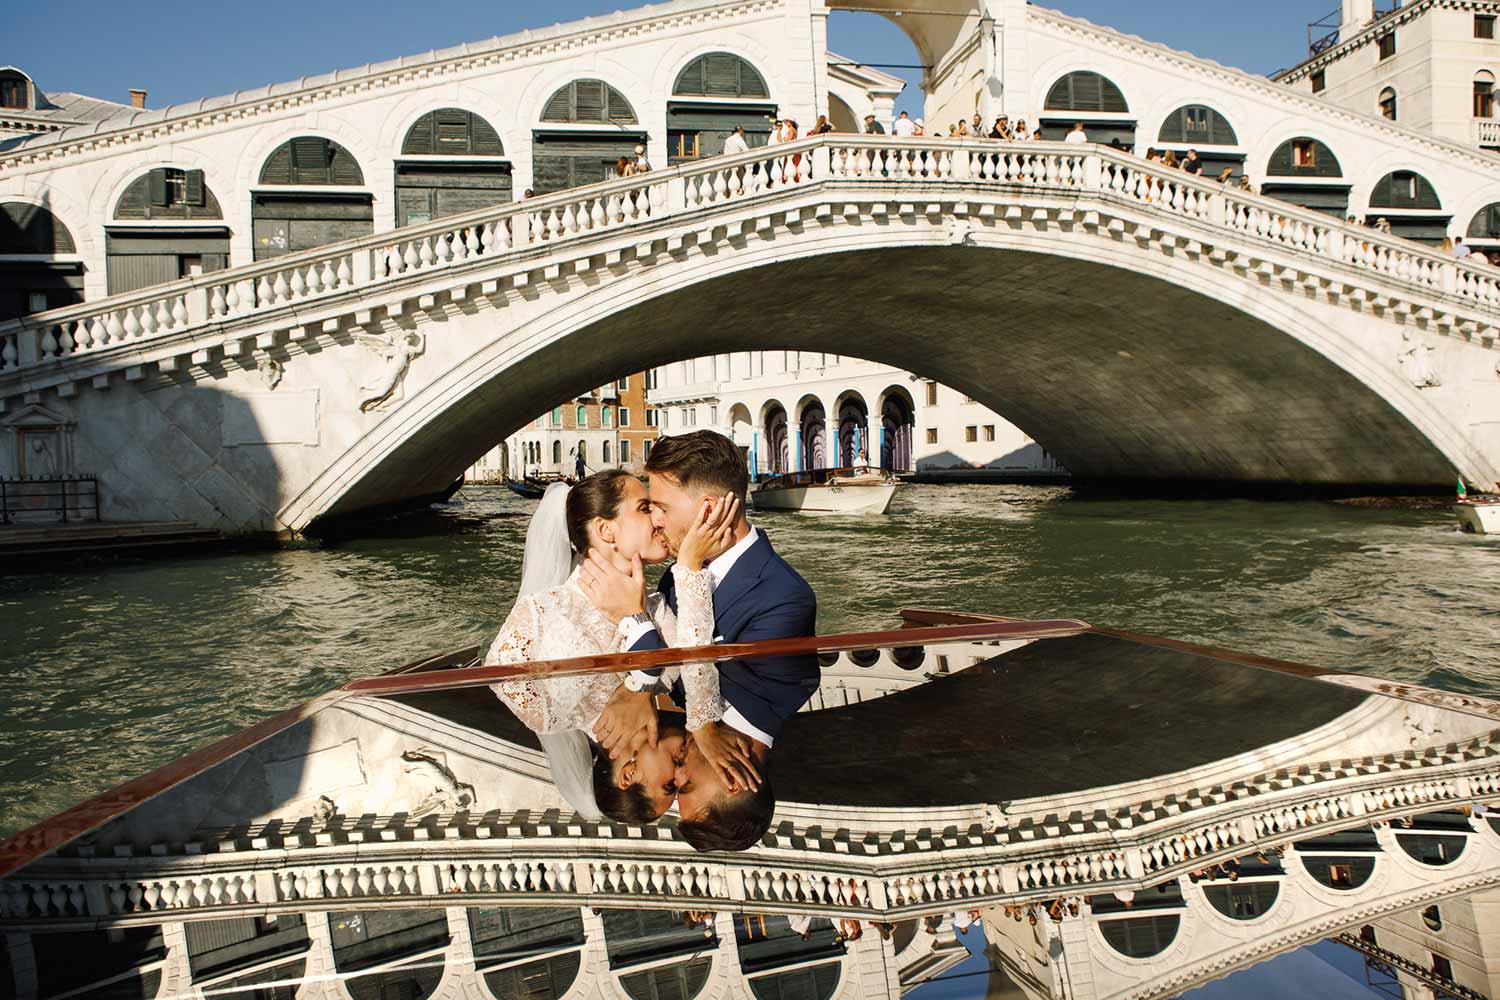 Giorgia and Francesco and their fairytale wedding in a water taxi